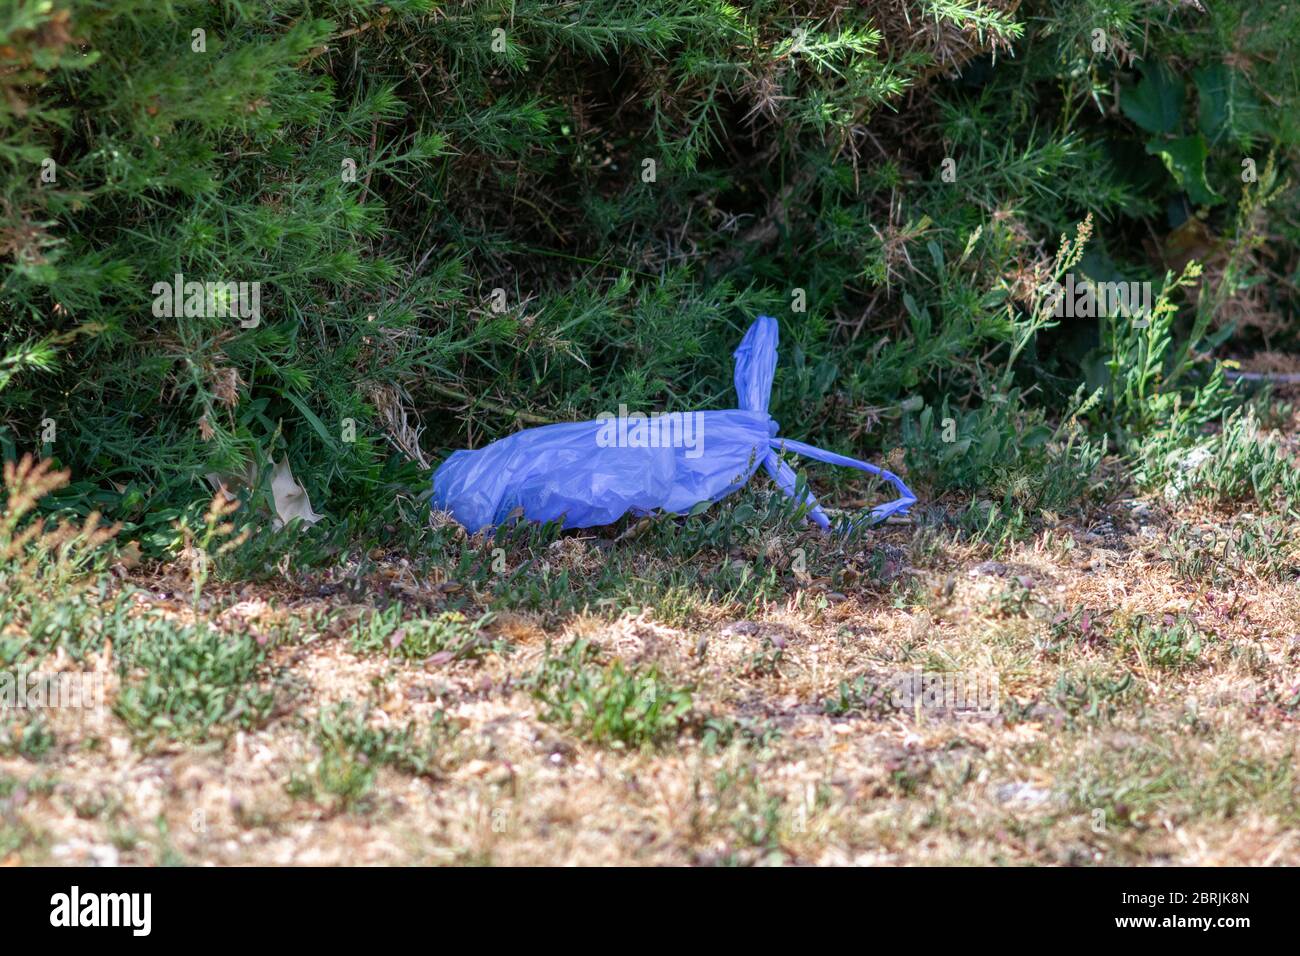 Discarded dog poo bag in the countryside Stock Photo